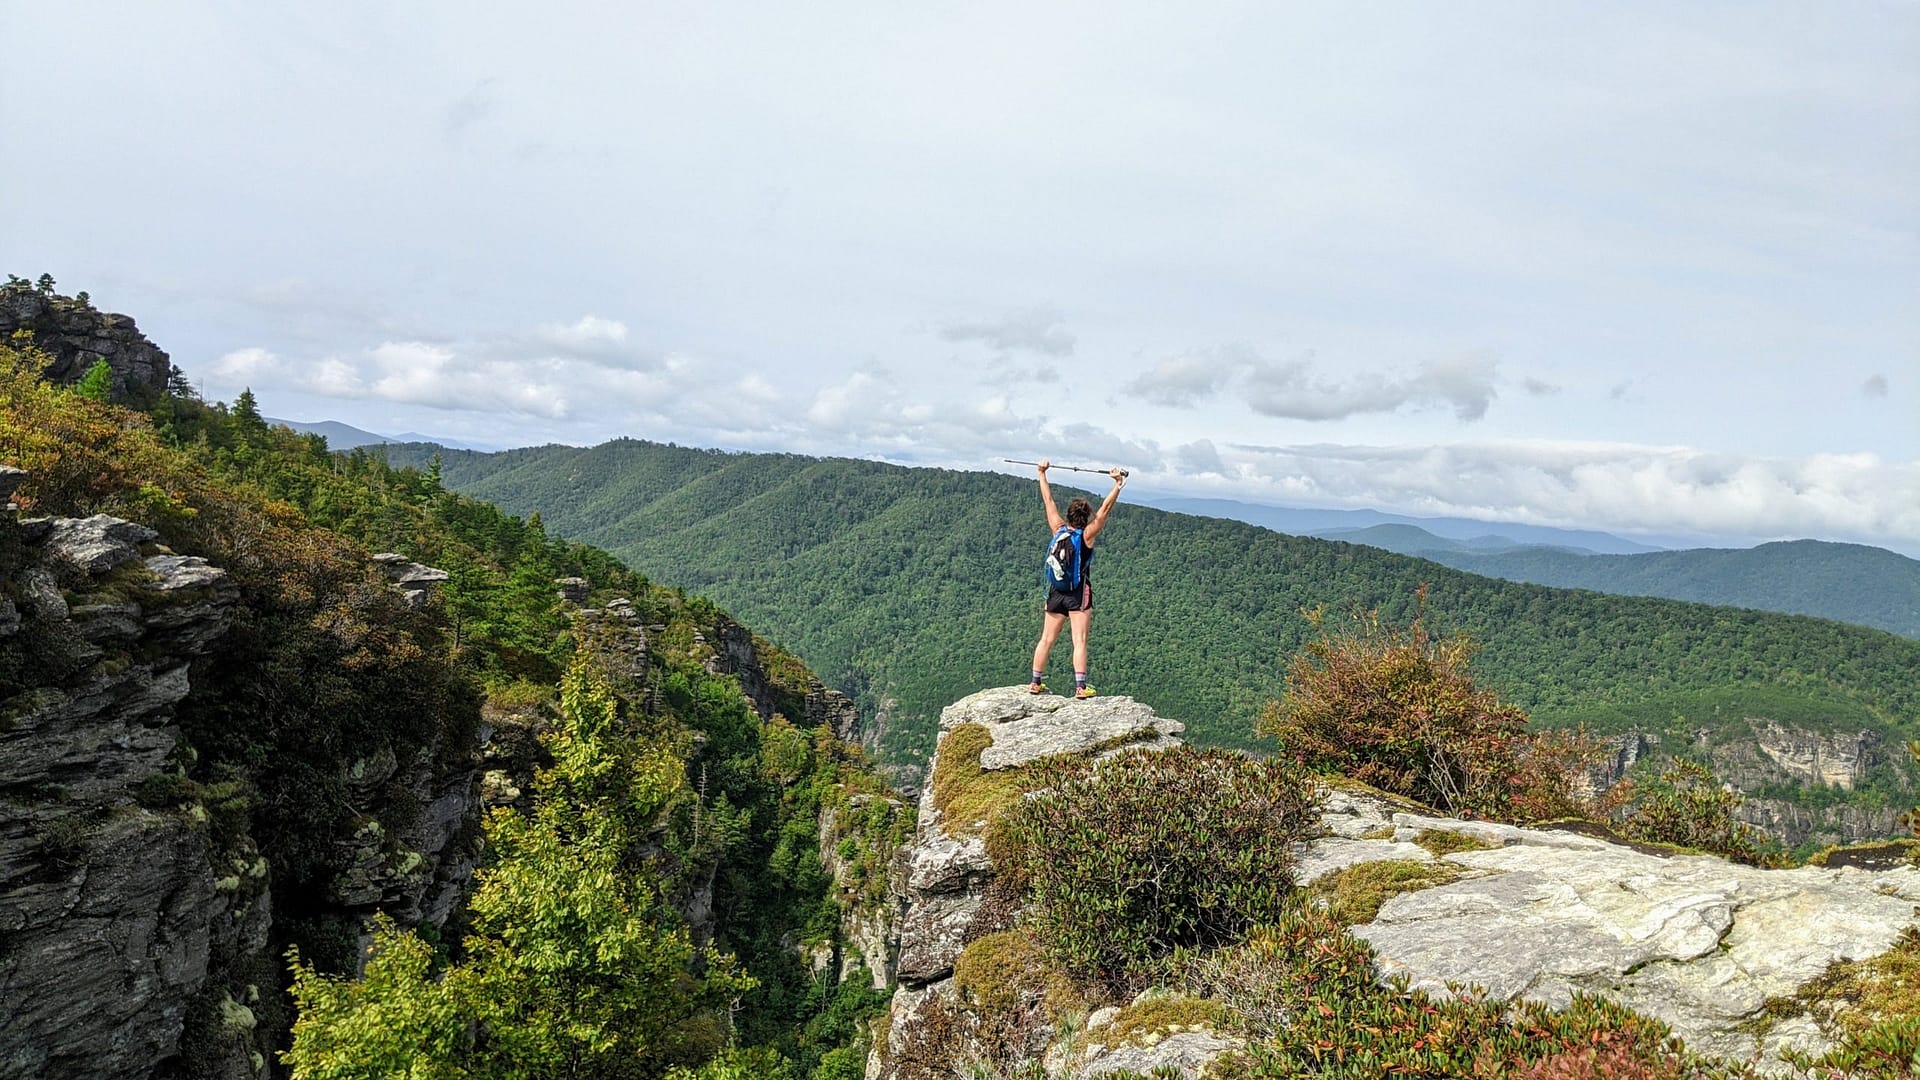 Learning to Overcome Fear: A girl holds a stick above her head looking over a mountain valley gorge